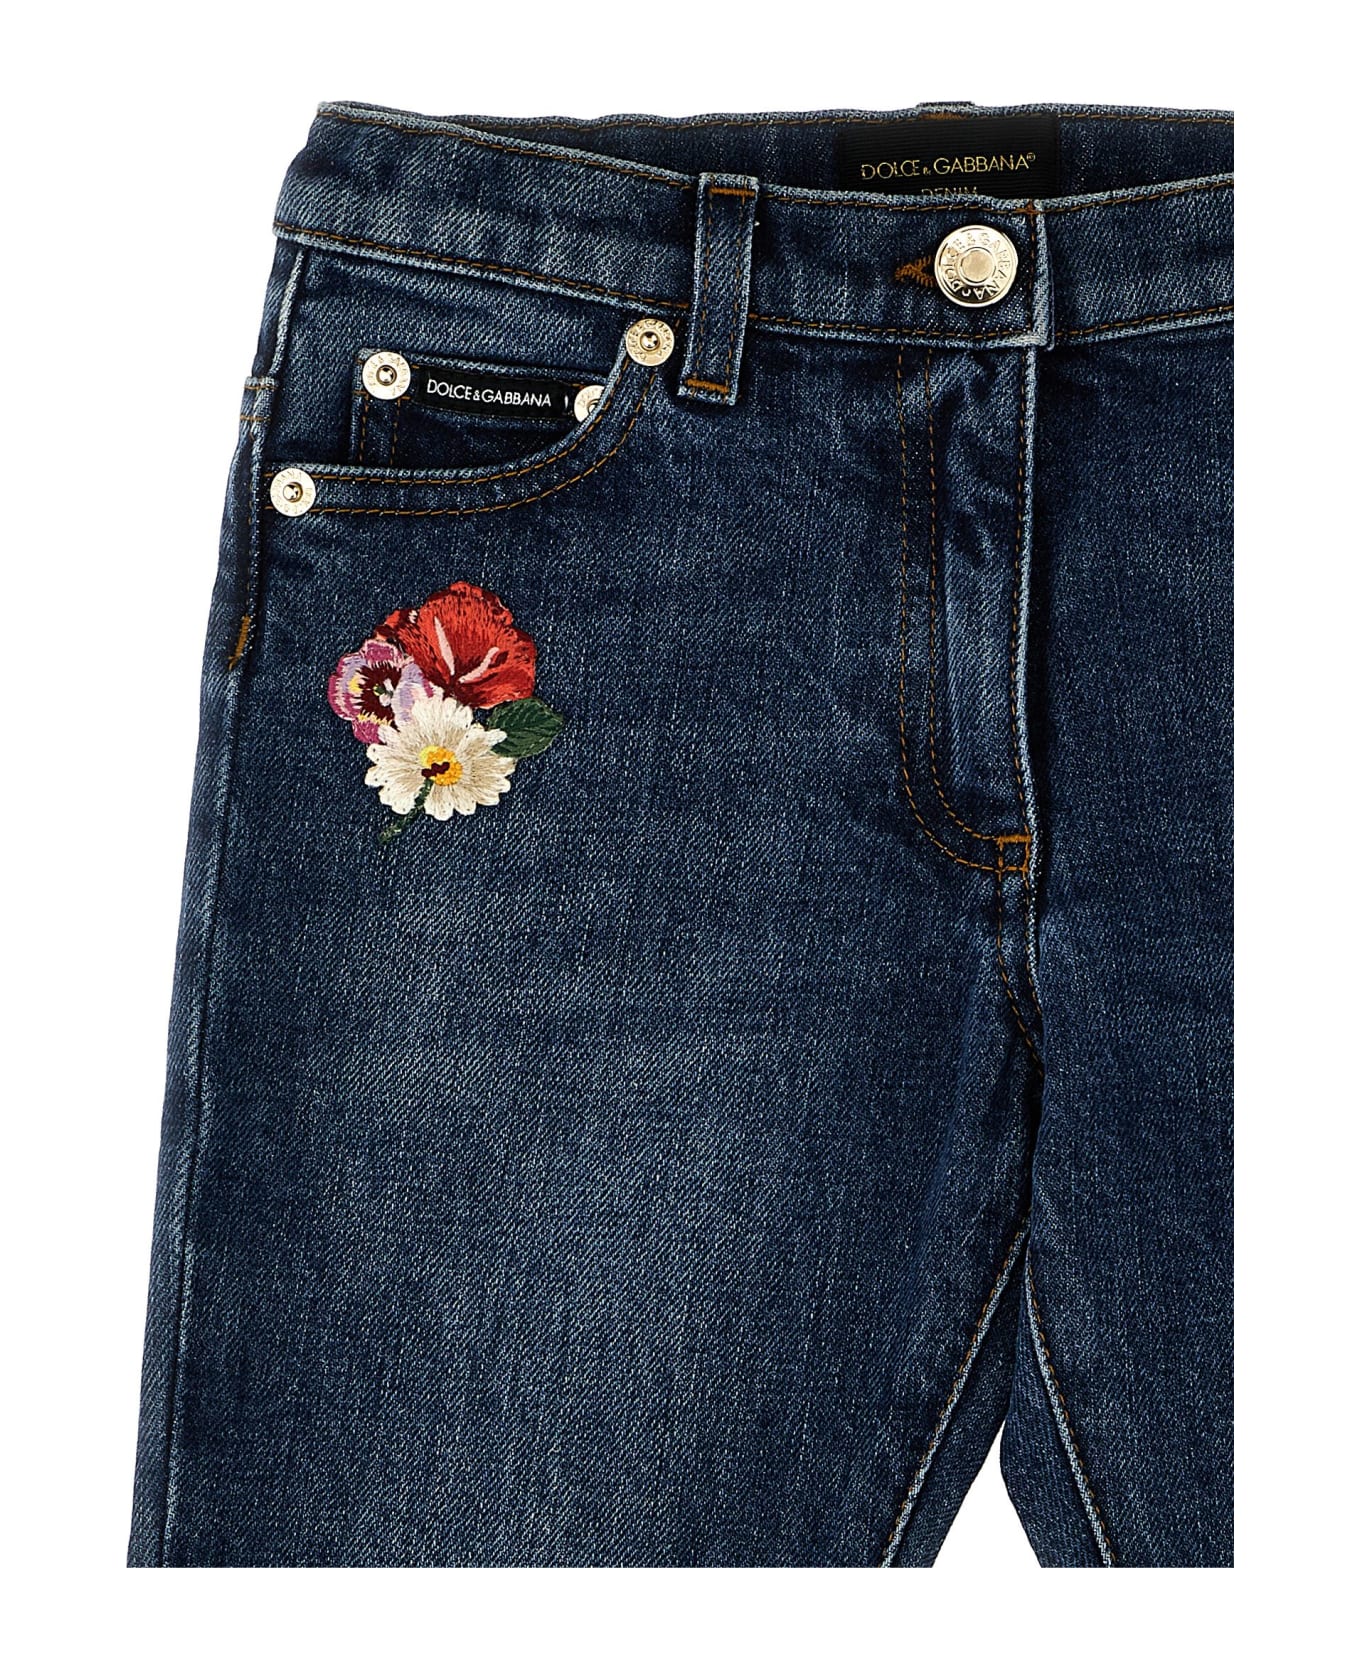 Dolce & Gabbana Embroidery Jeans - BLUE ボトムス